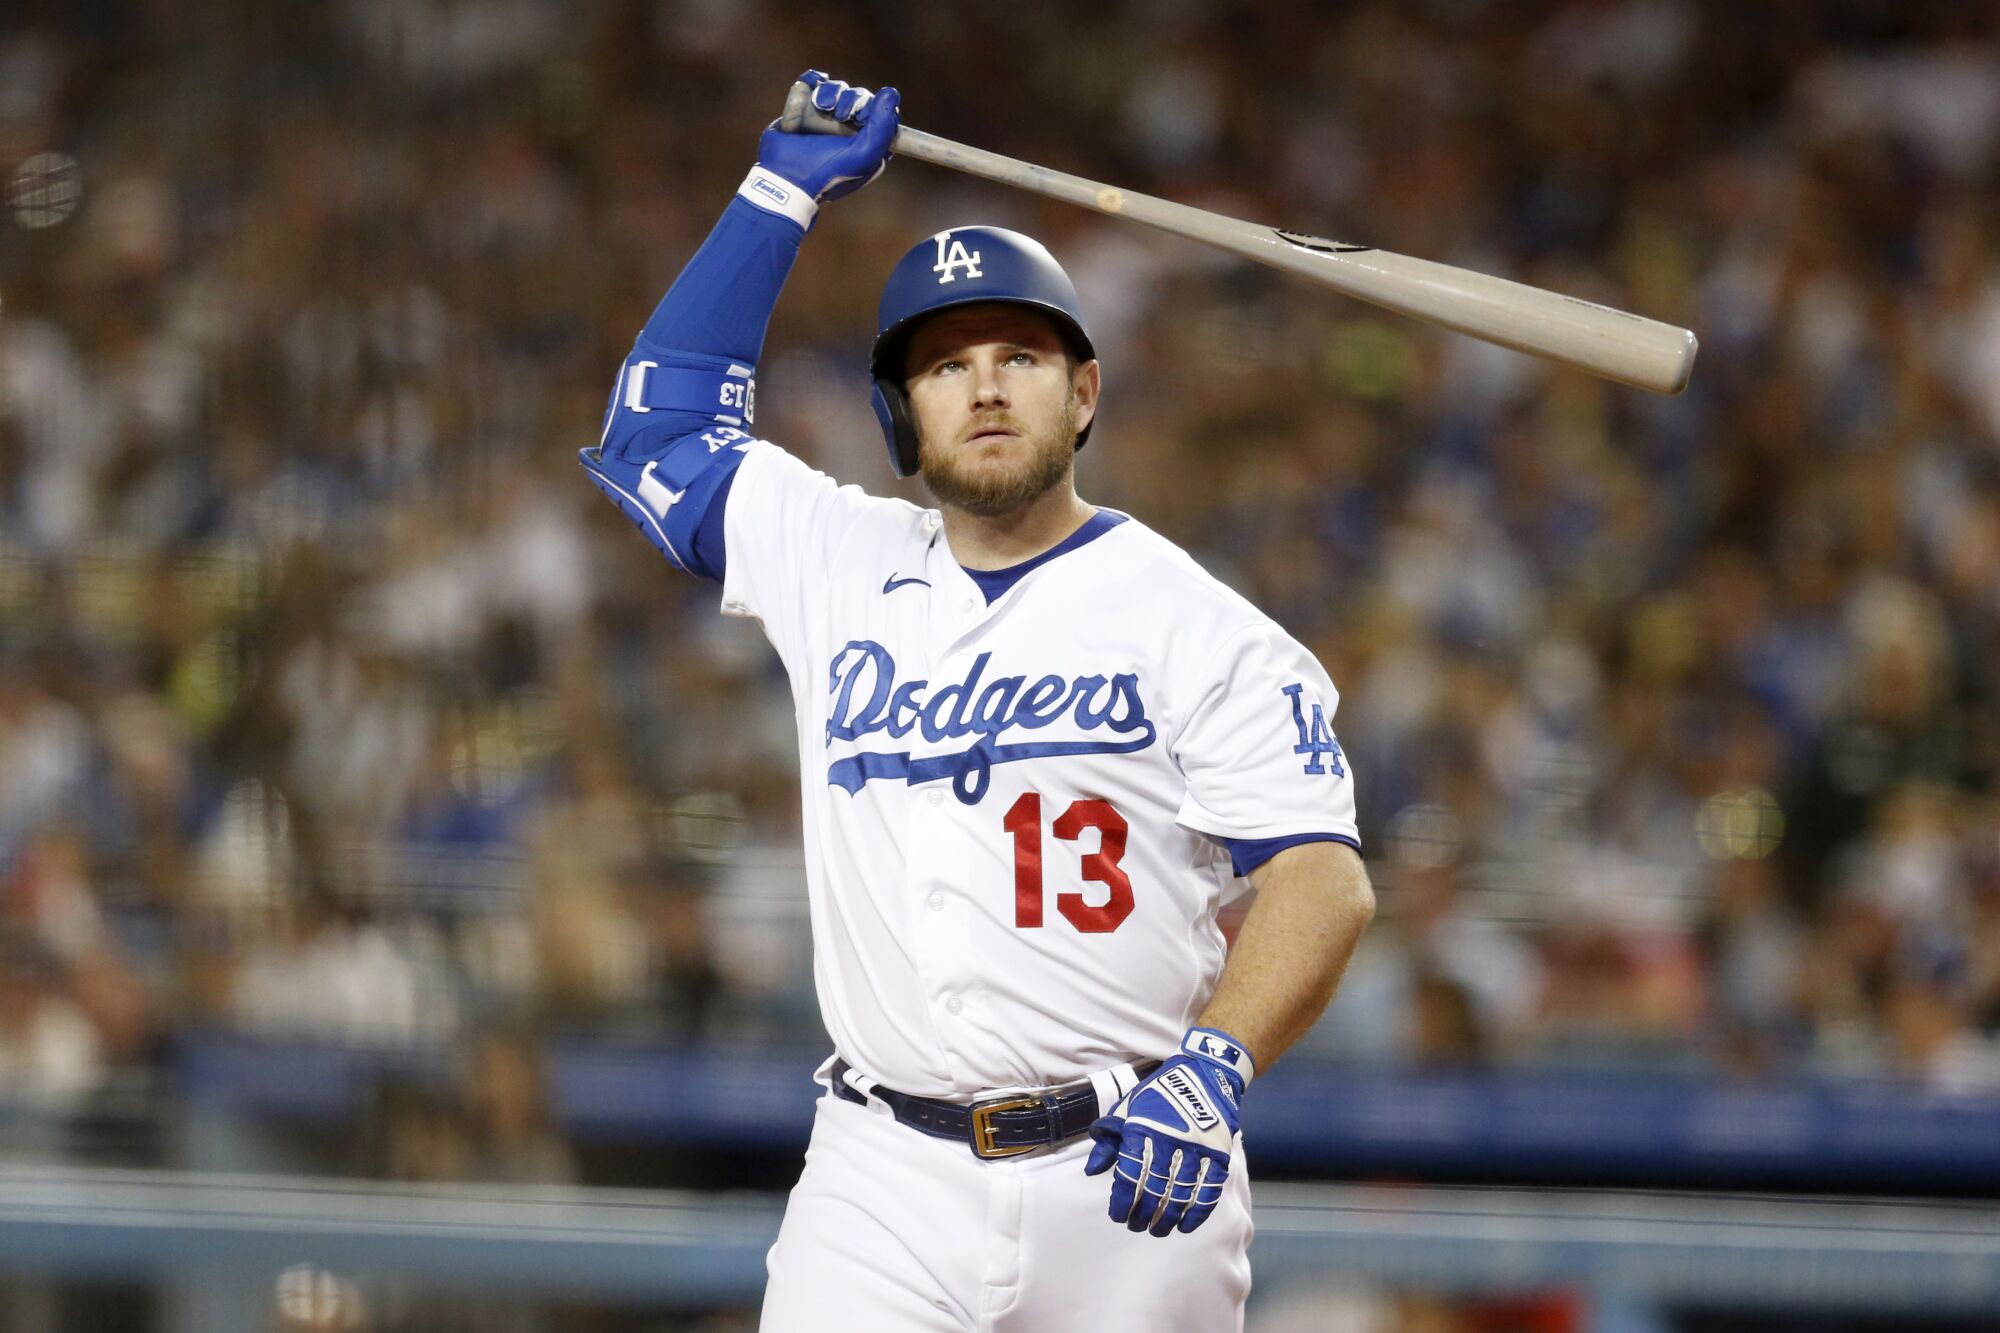 Dodgers third baseman Max Muncy reacts after striking out in the sixth inning.